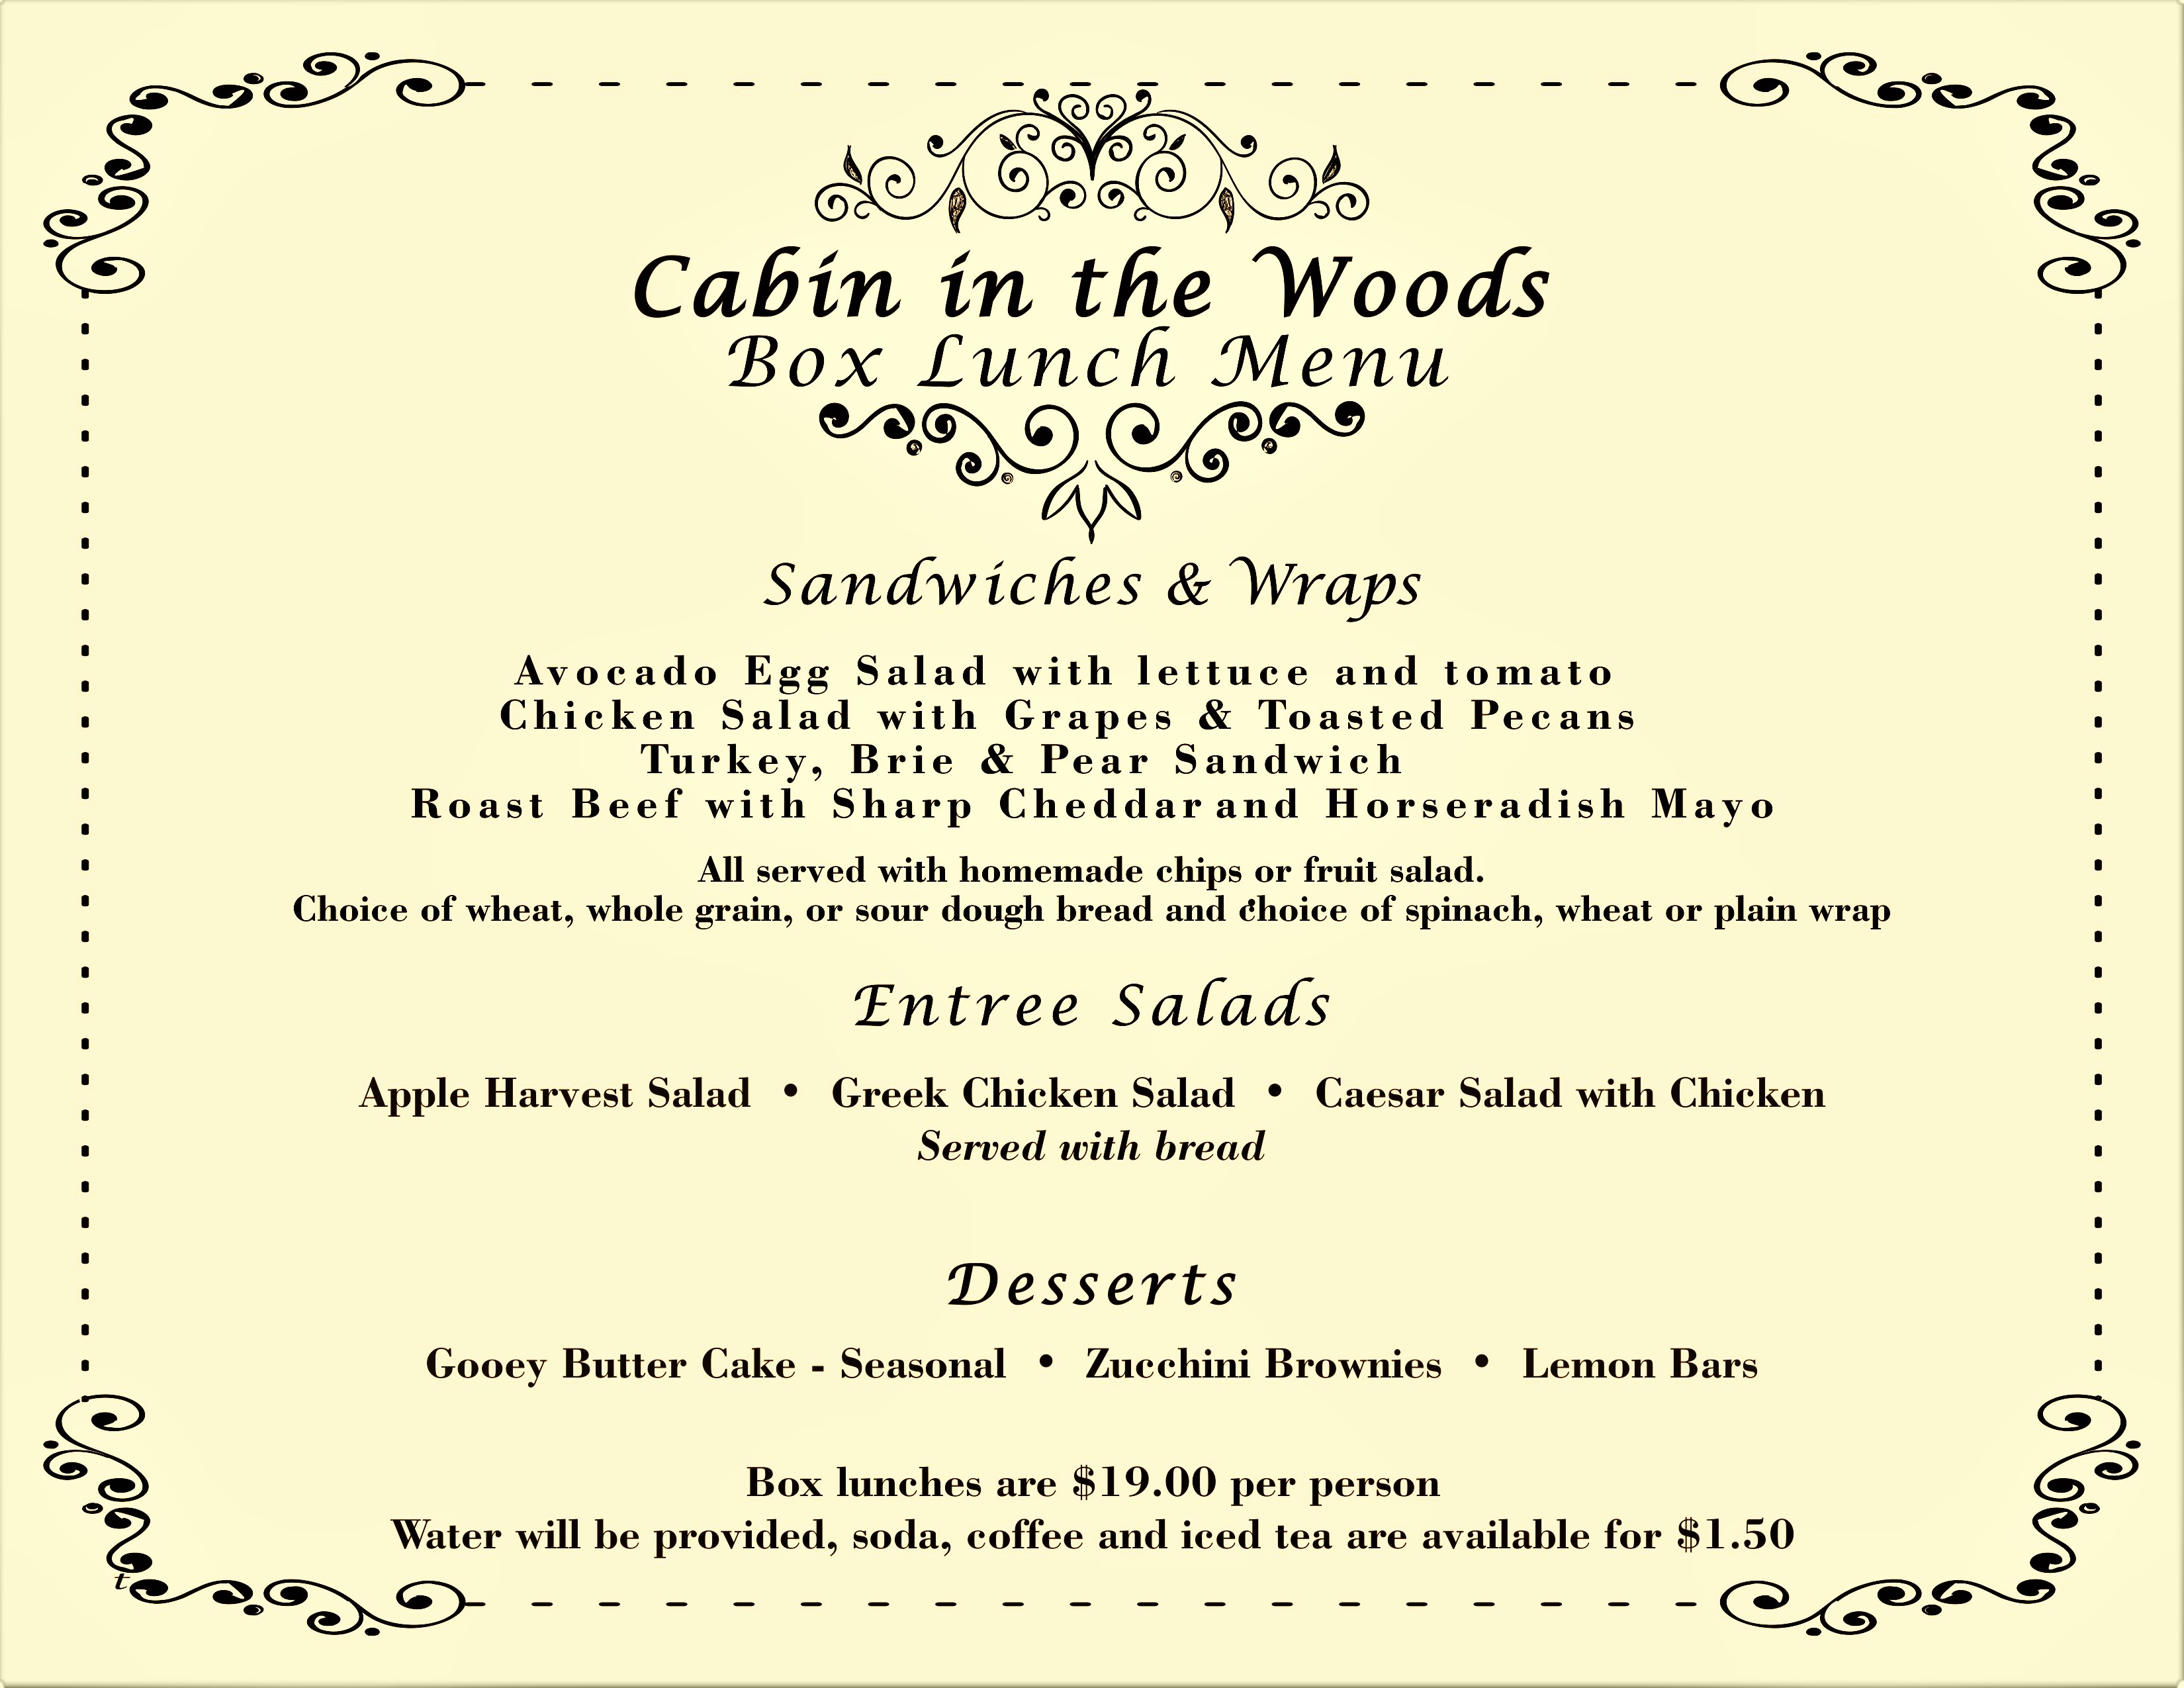 Cabin in the Woods – Box Lunch Menu